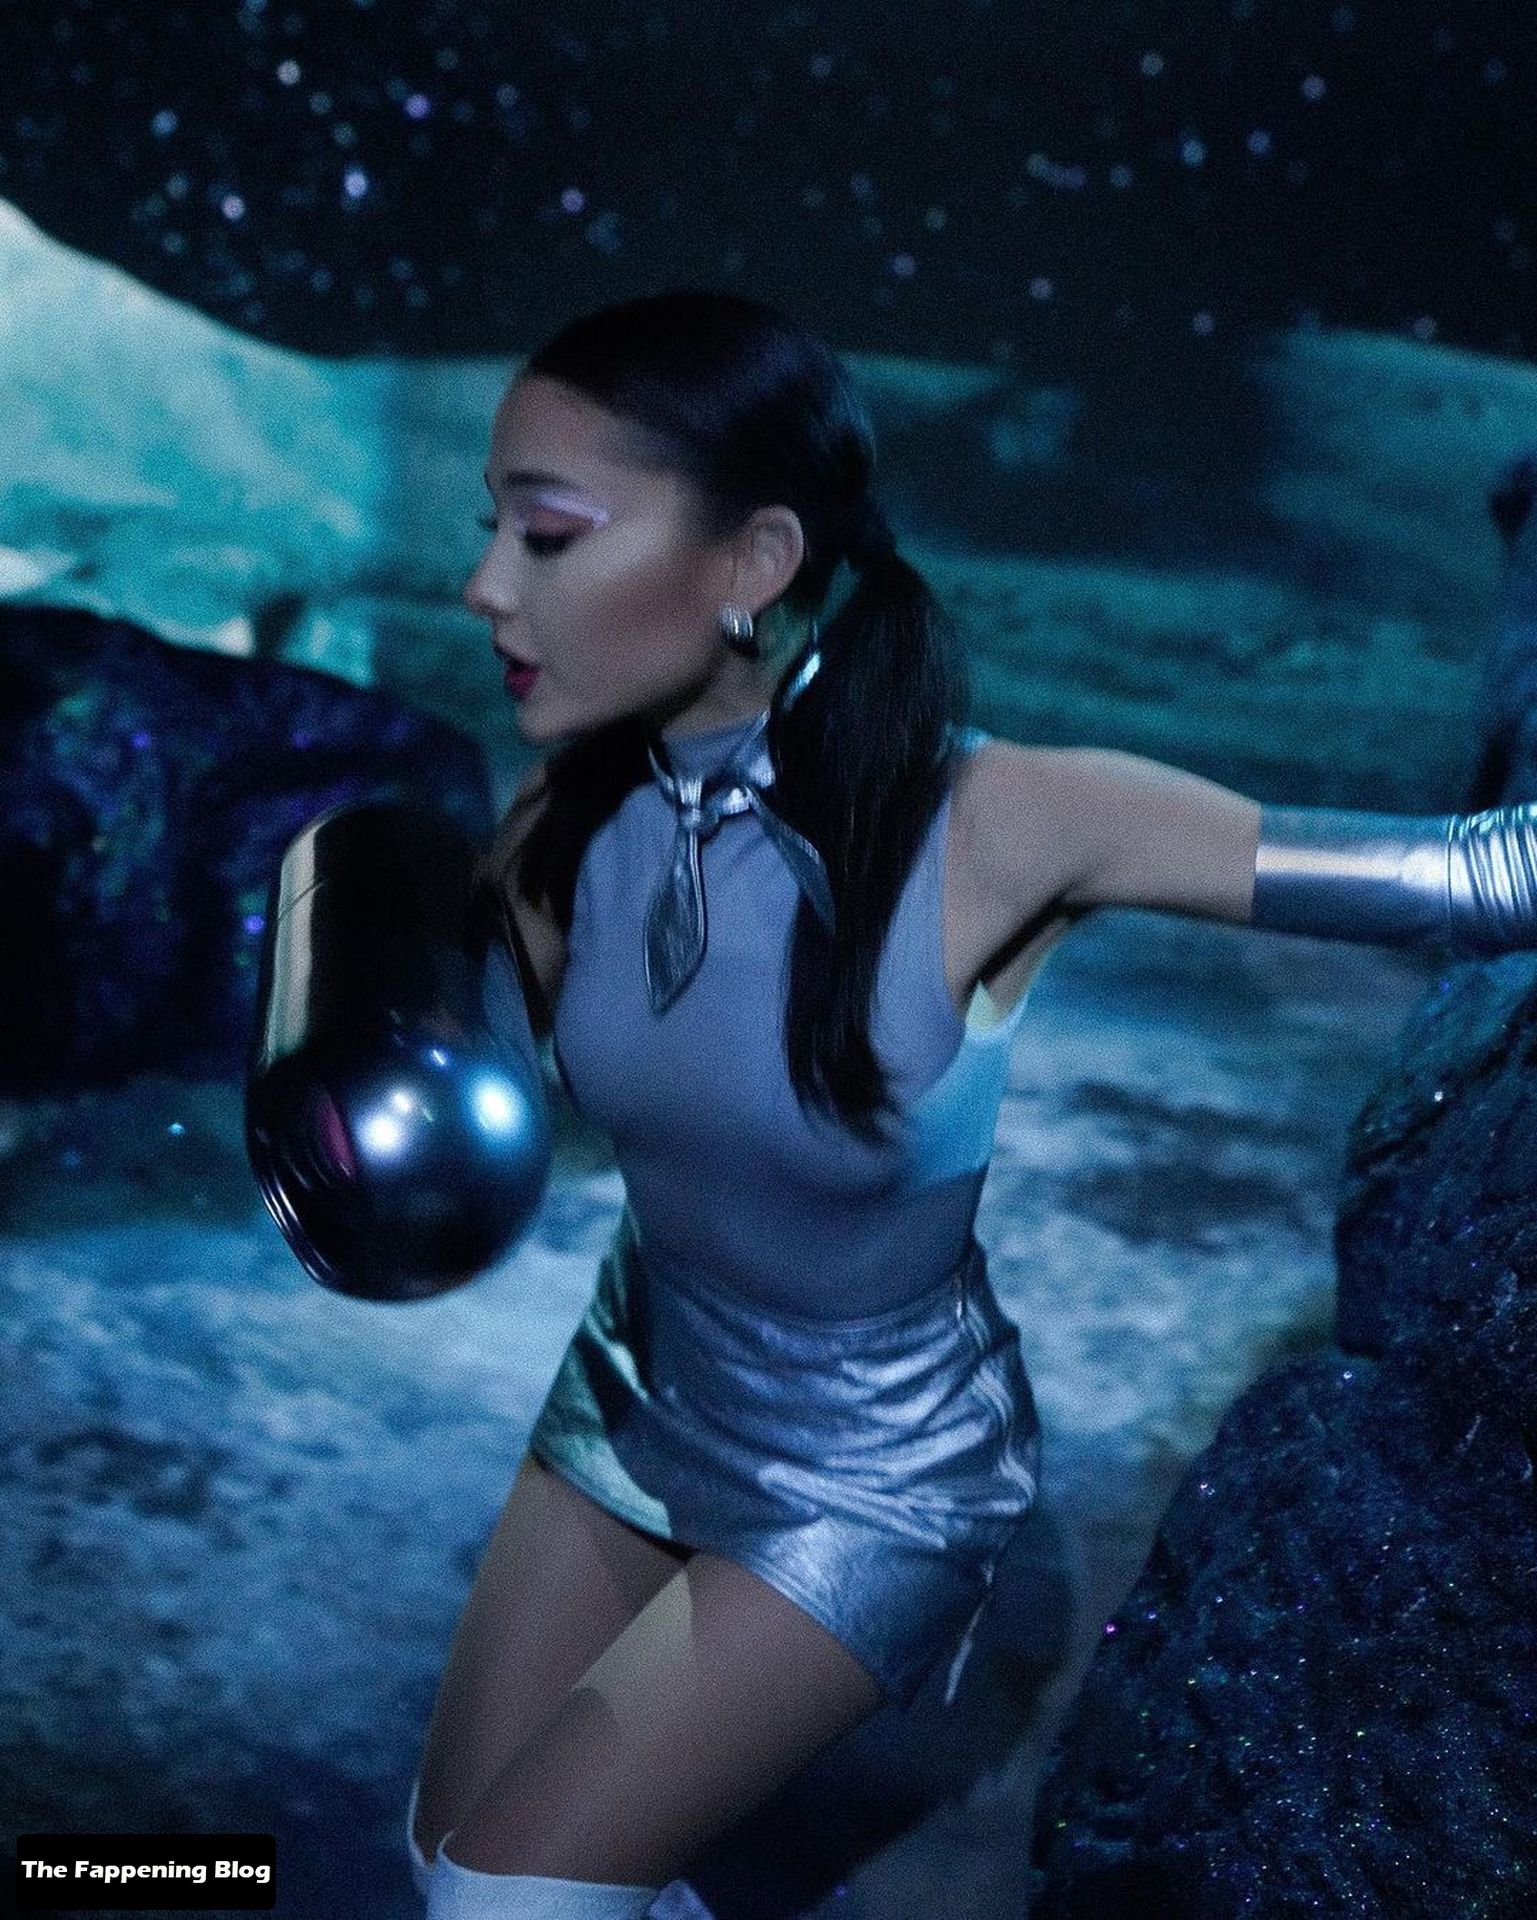 Ariana Grande Flaunts Her Pokies in a New Promo Shoot (17 Photos + Video)